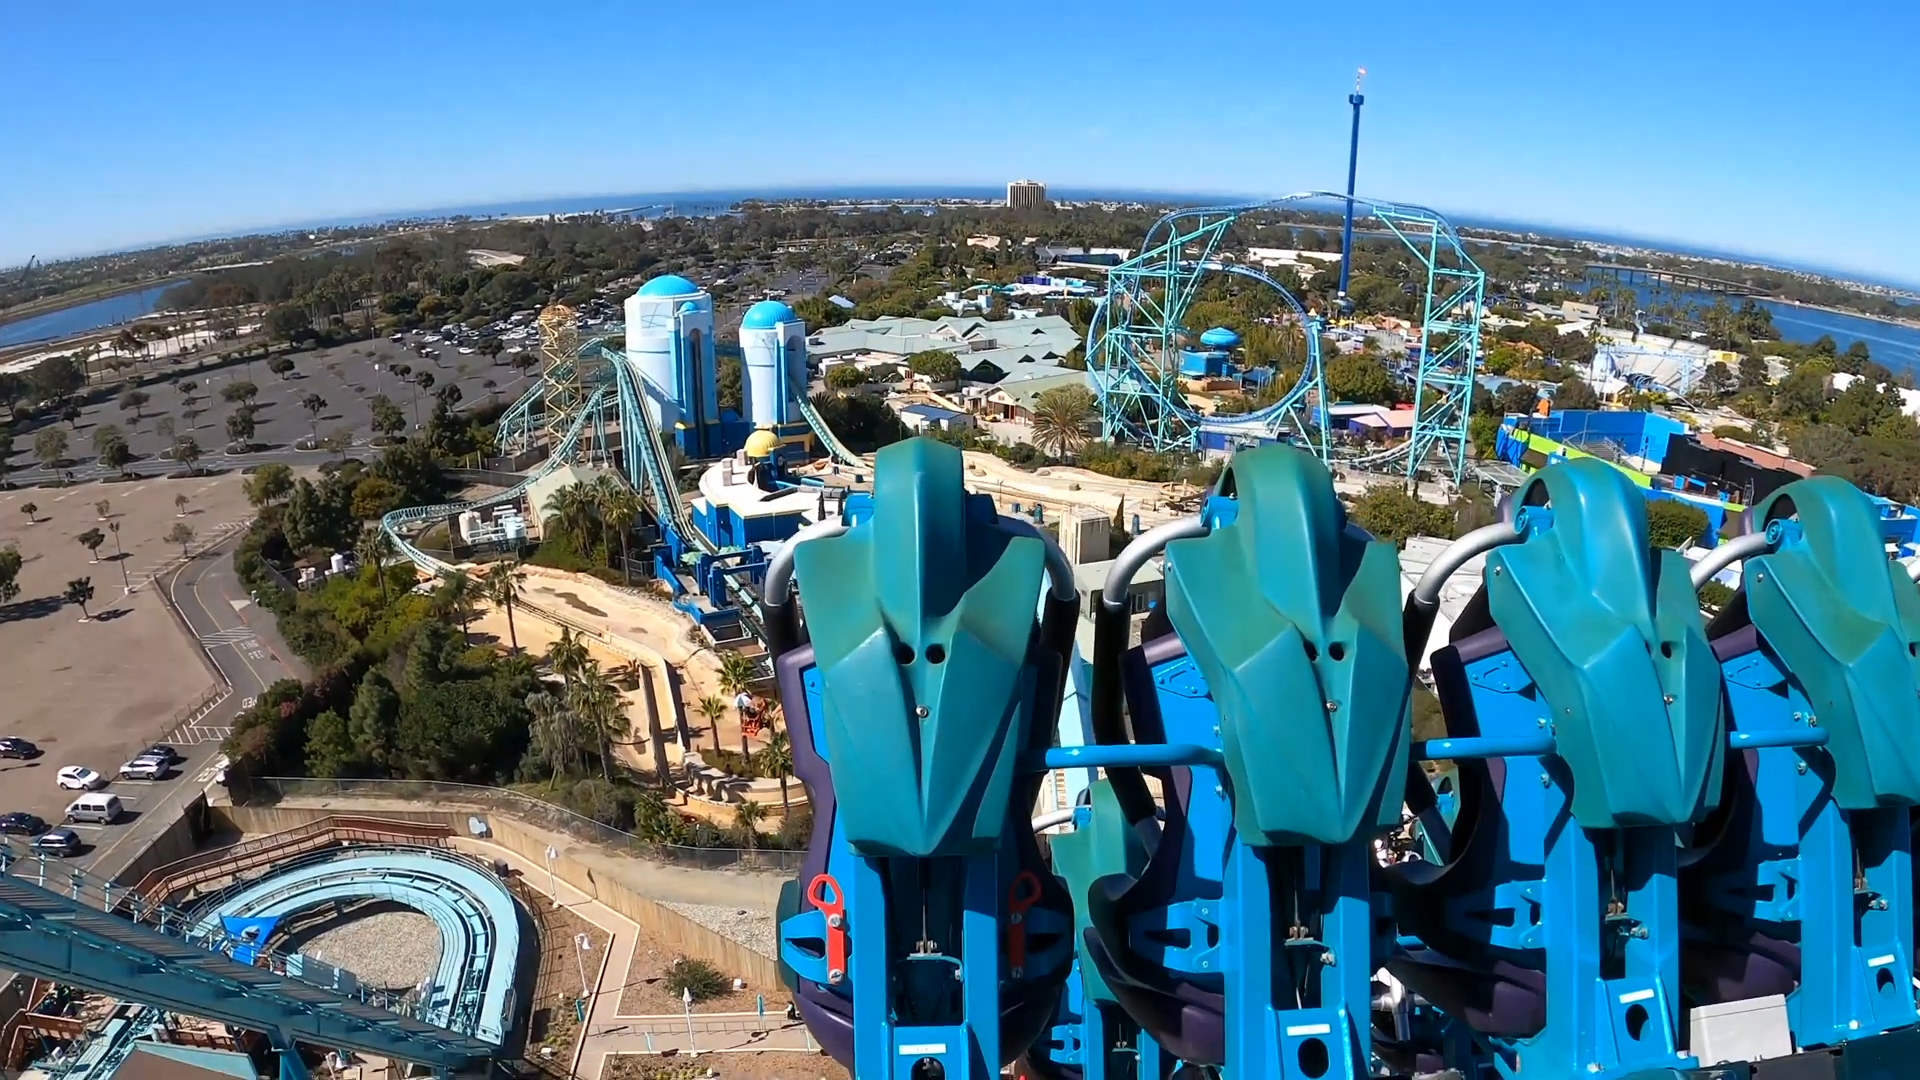 NEW COASTER: Emperor Dives into SeaWorld San Diego Starting March 12